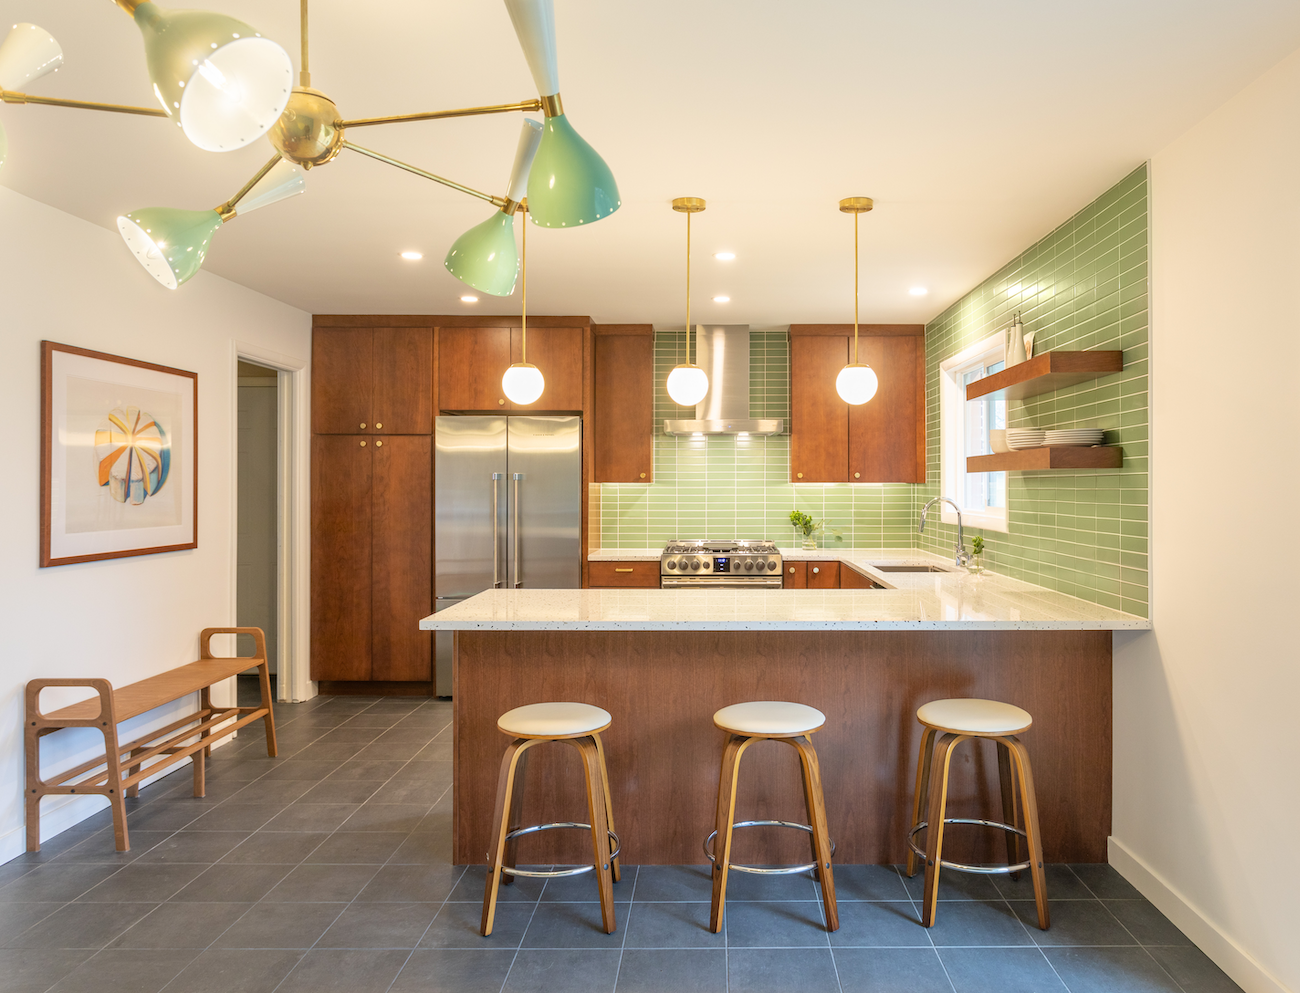 A Midcentury Renovation: What to Expect